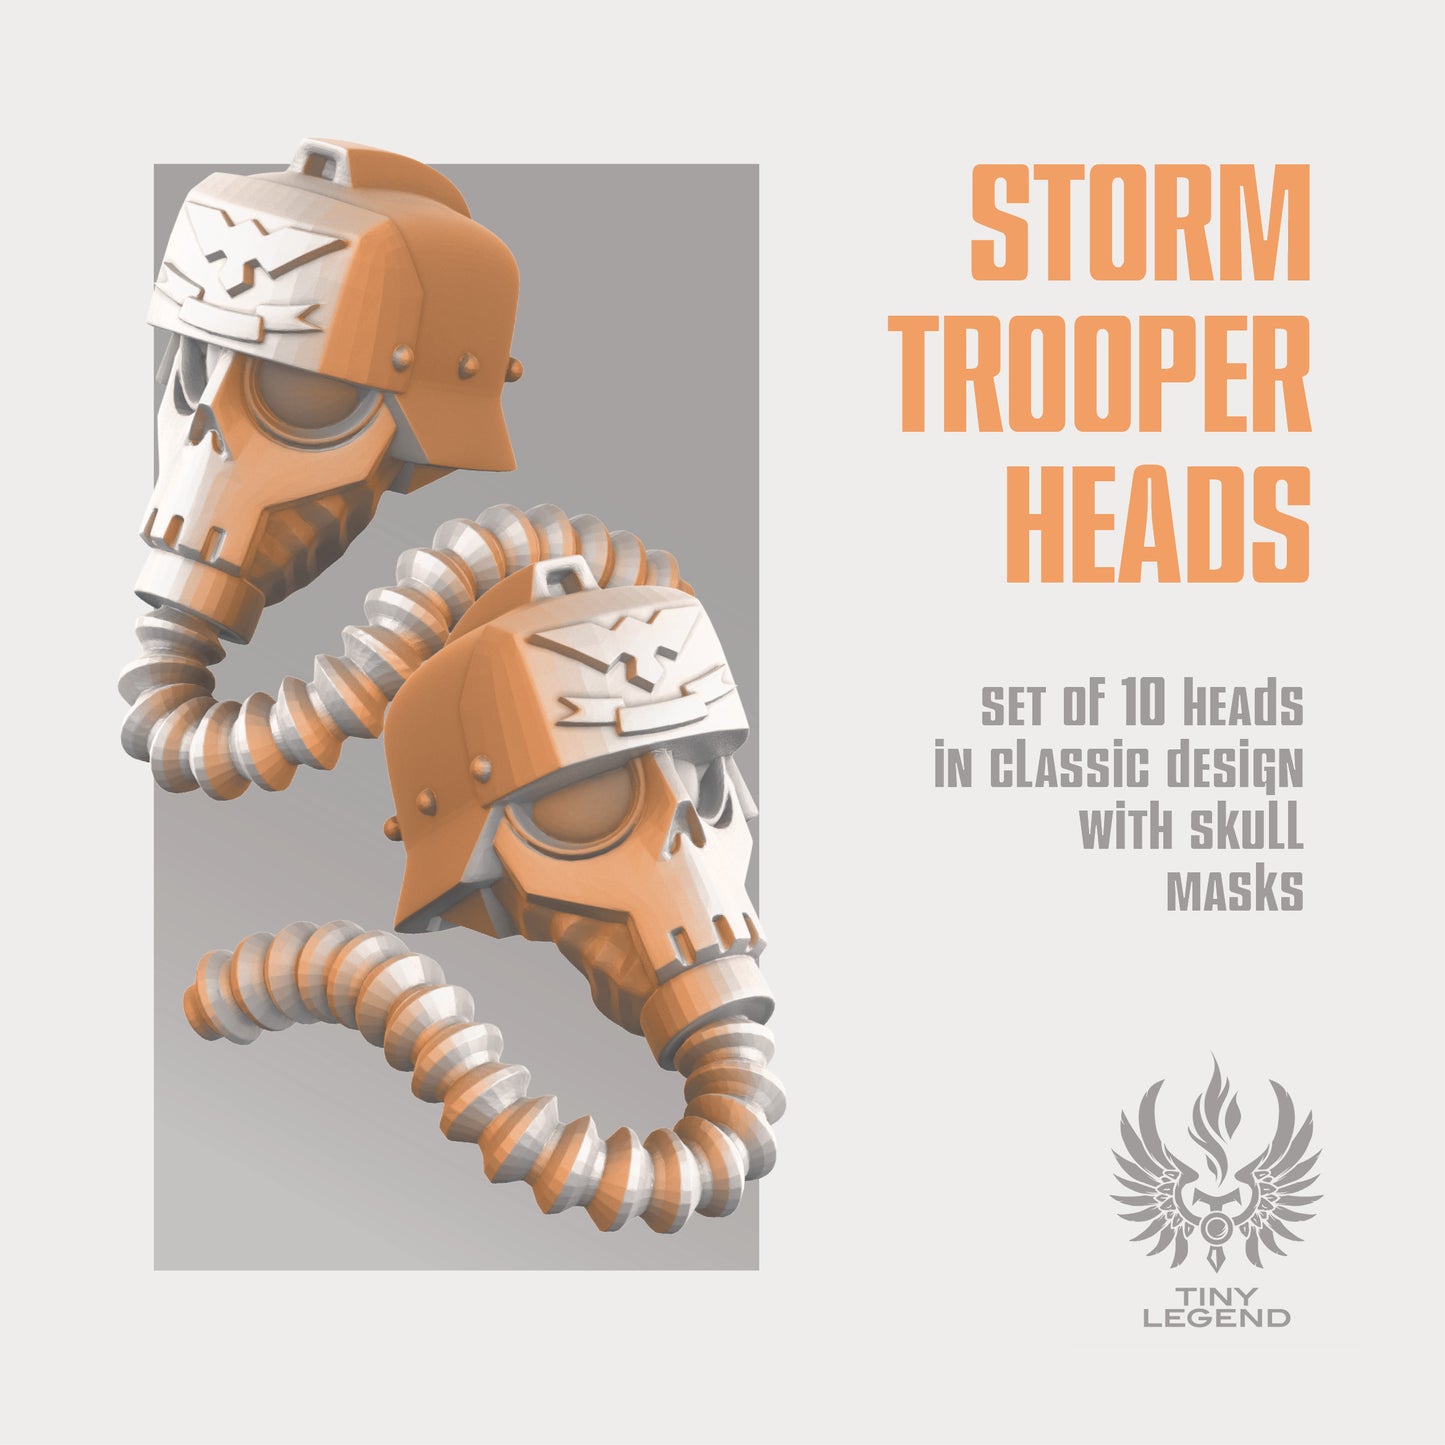 Storm troopers heads set